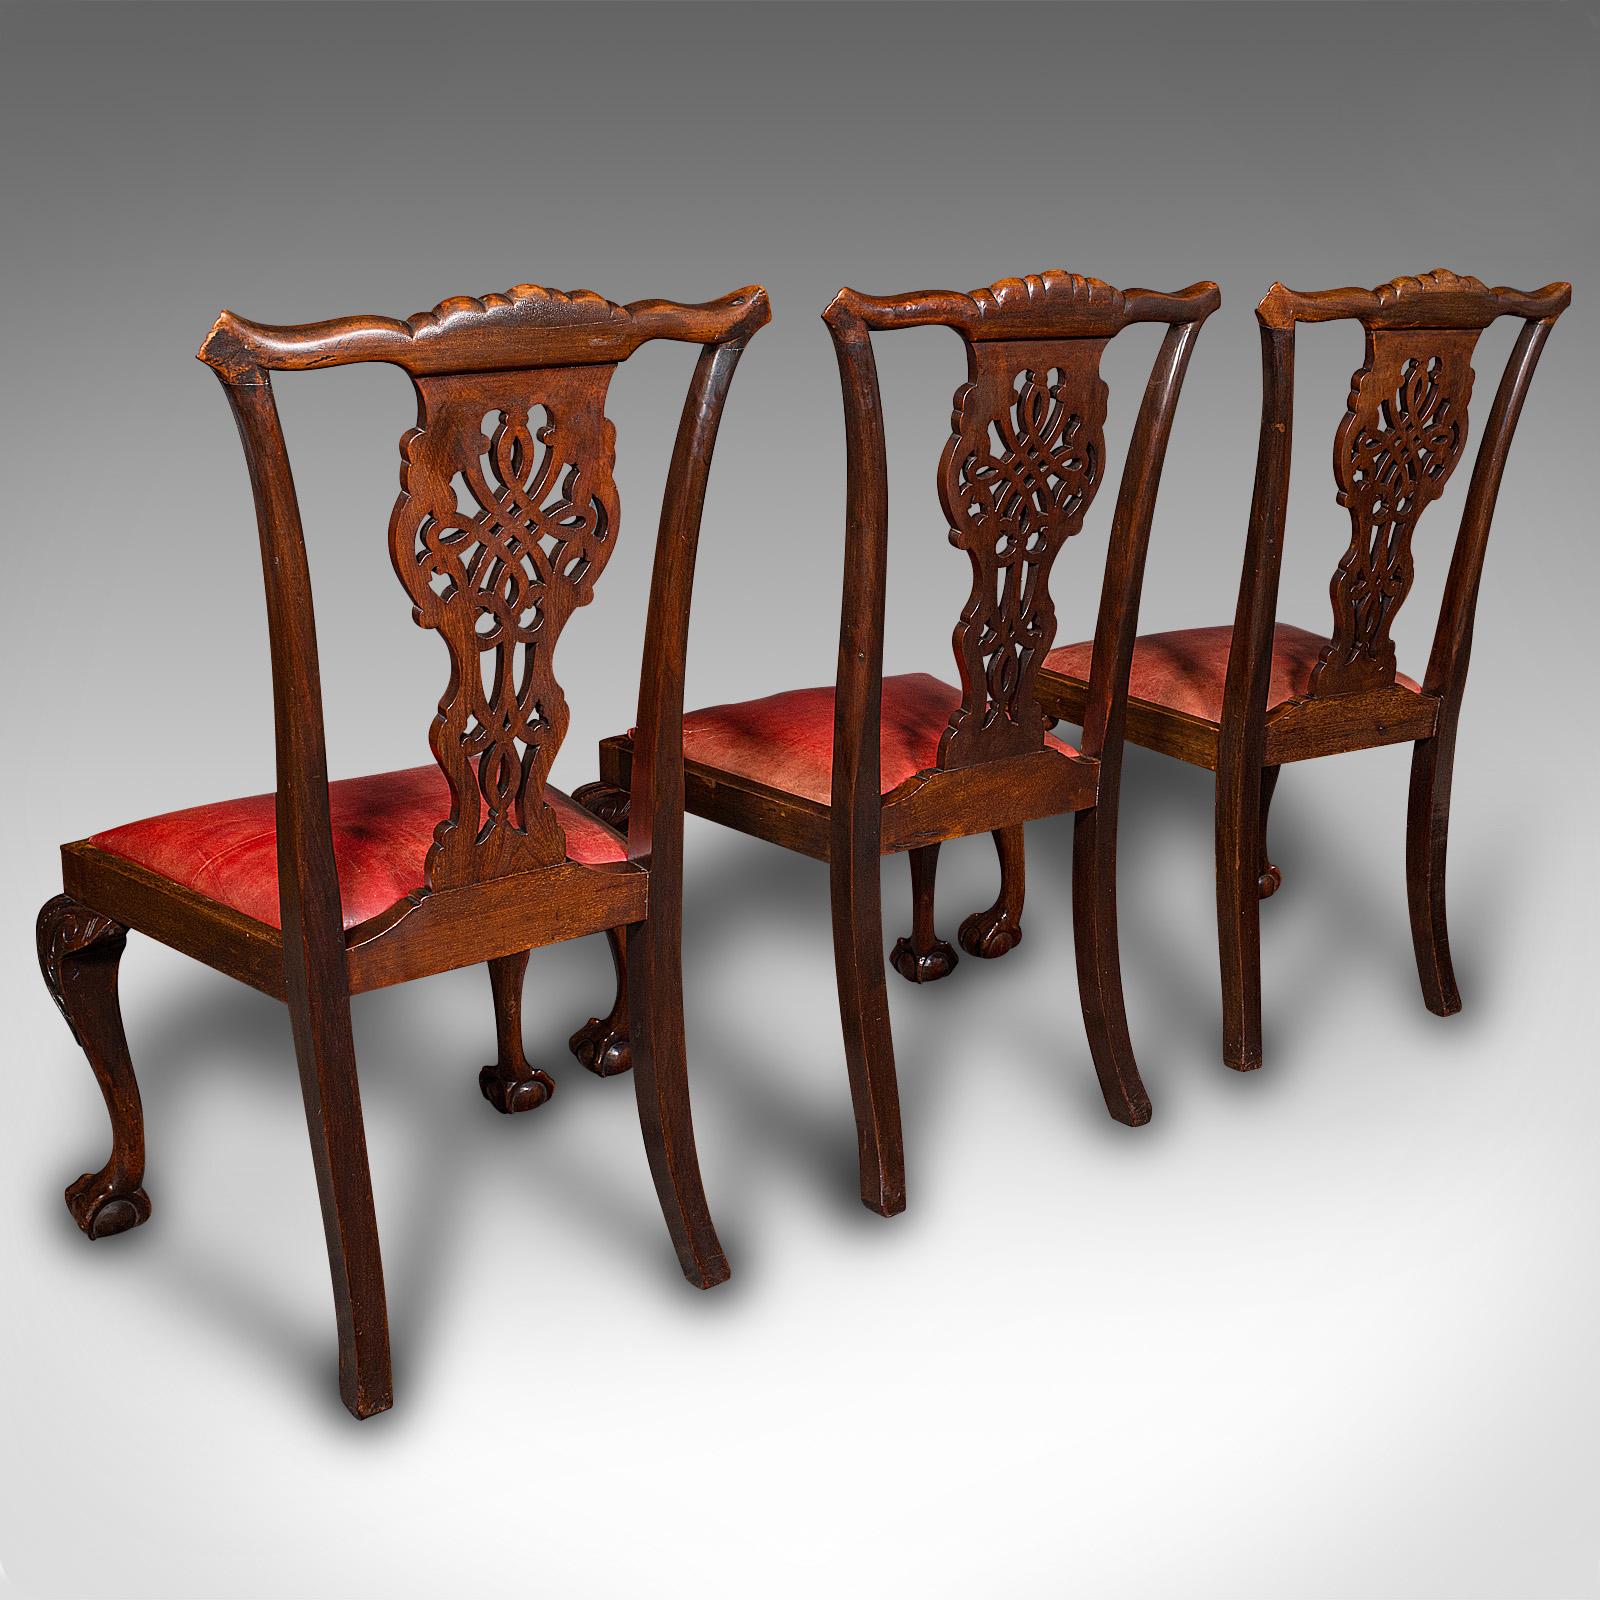 19th Century Set Of 8 Antique Dining Chairs, English, Leather, Chippendale Revival, Victorian